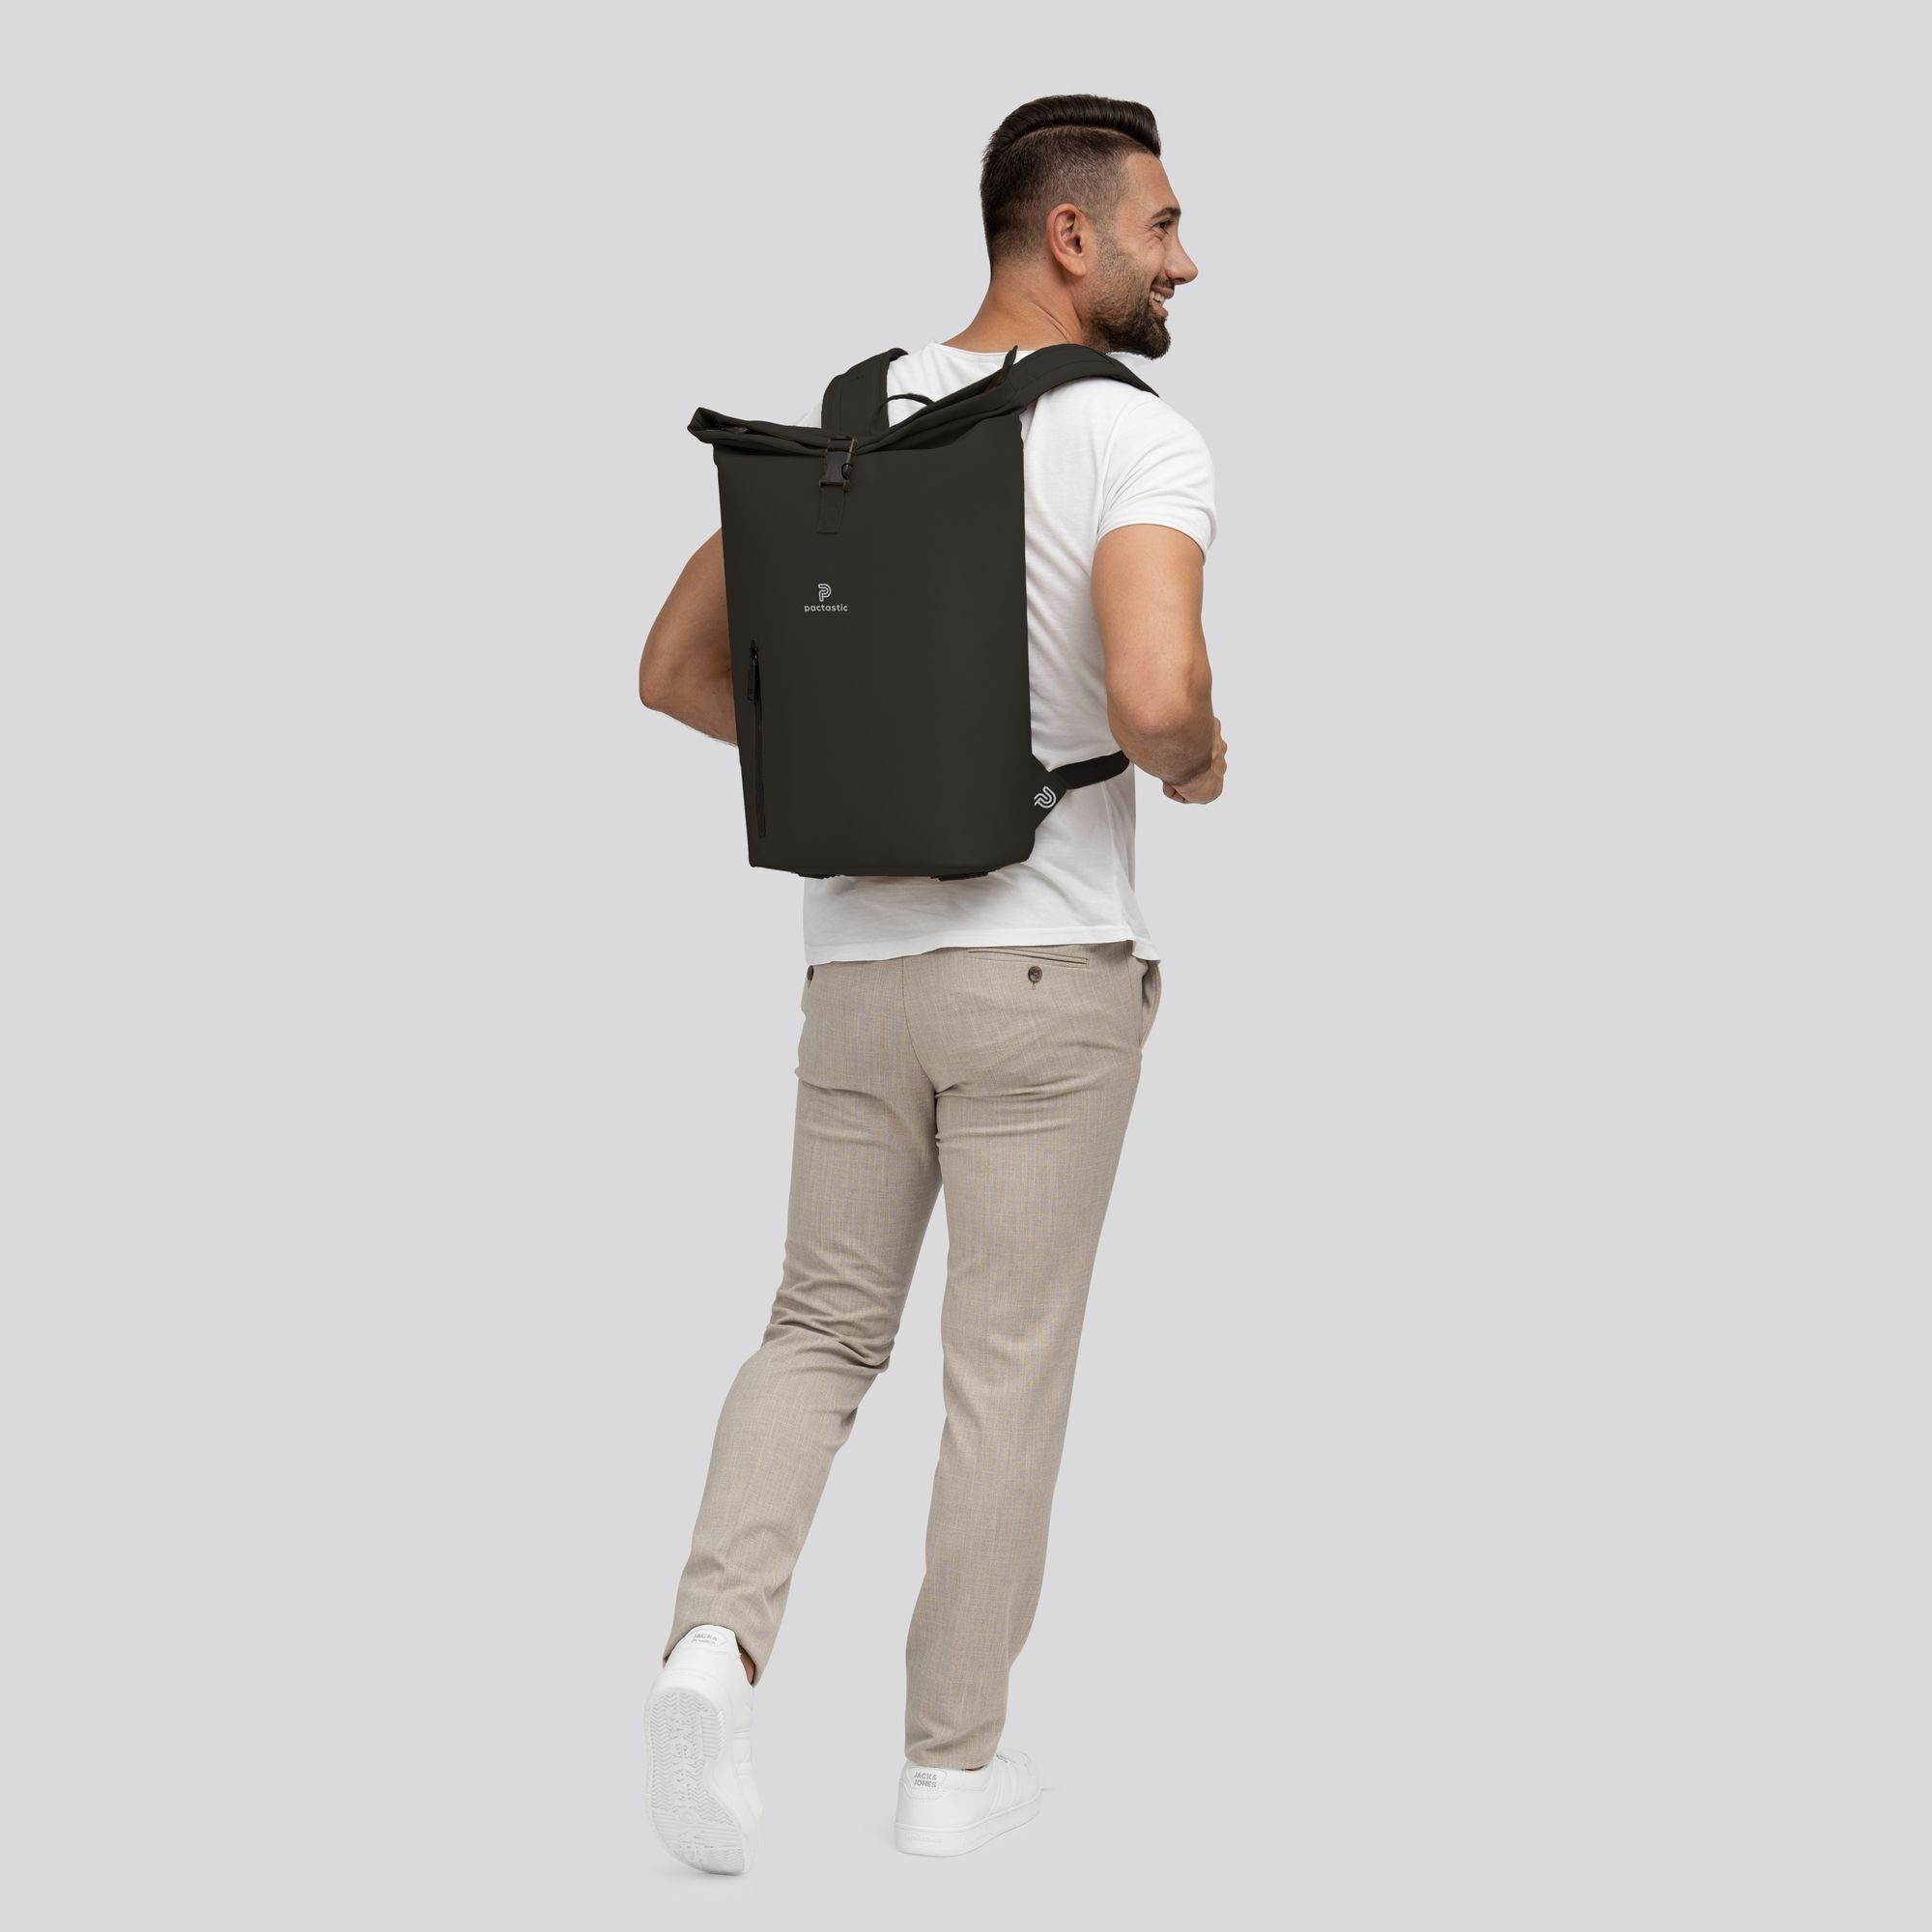 Collection, Daypack Tech-Material black Pactastic Urban Veganes